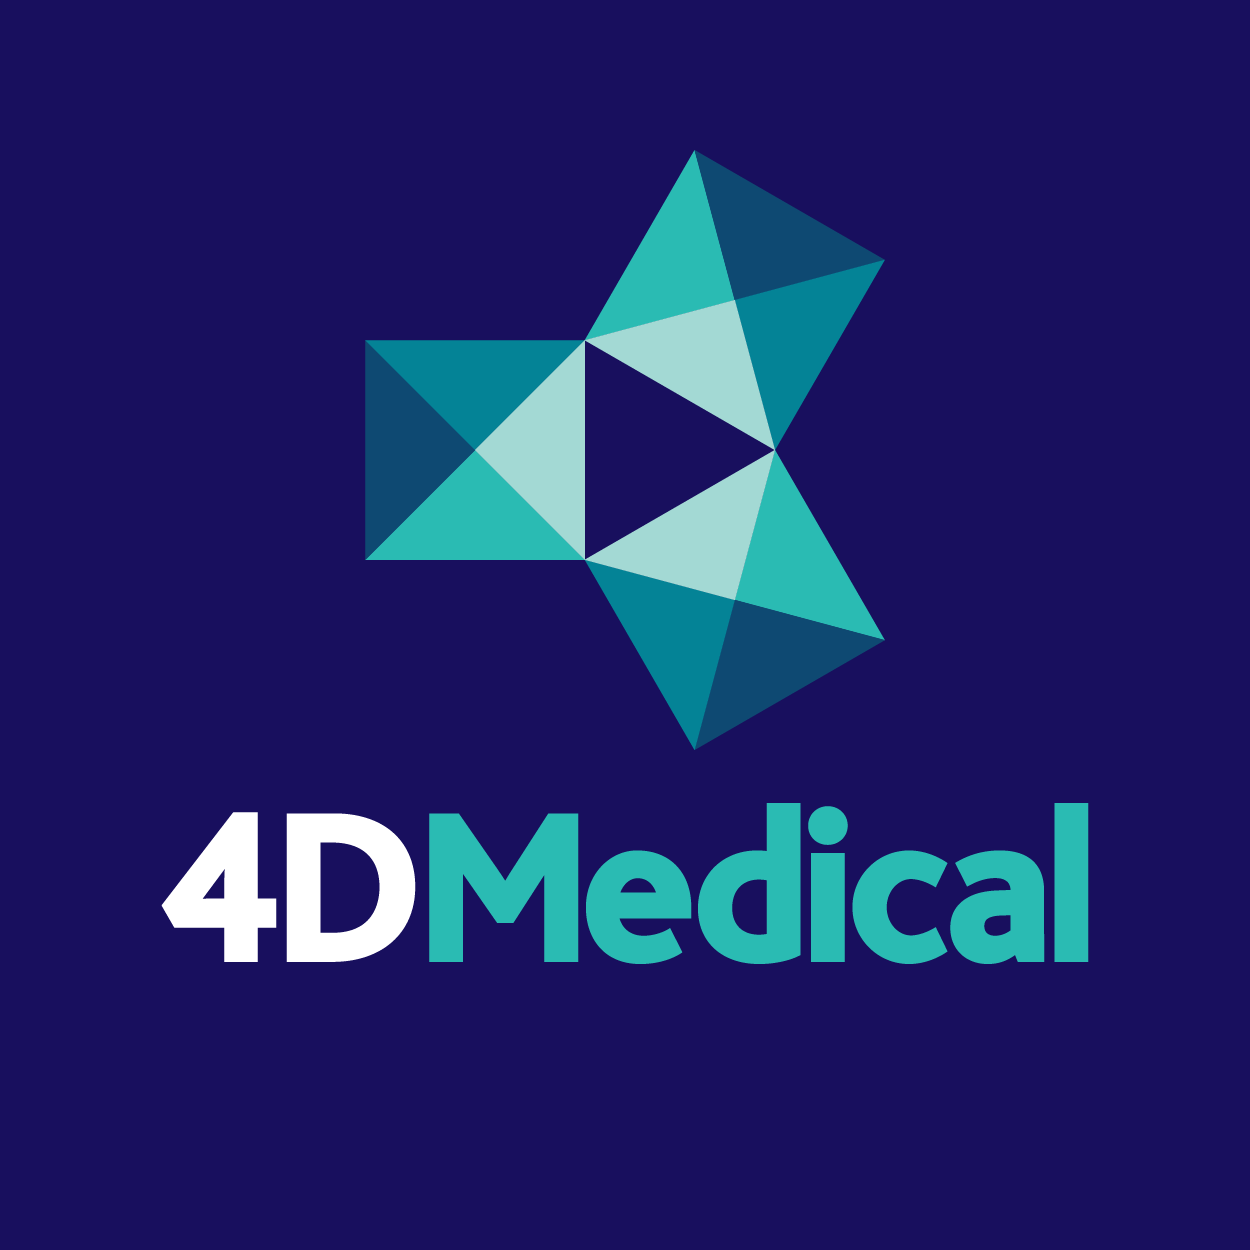 Imbio to be Acquired by 4DMedical Creating Comprehensive Cardiothoracic Image Analysis Portfolio